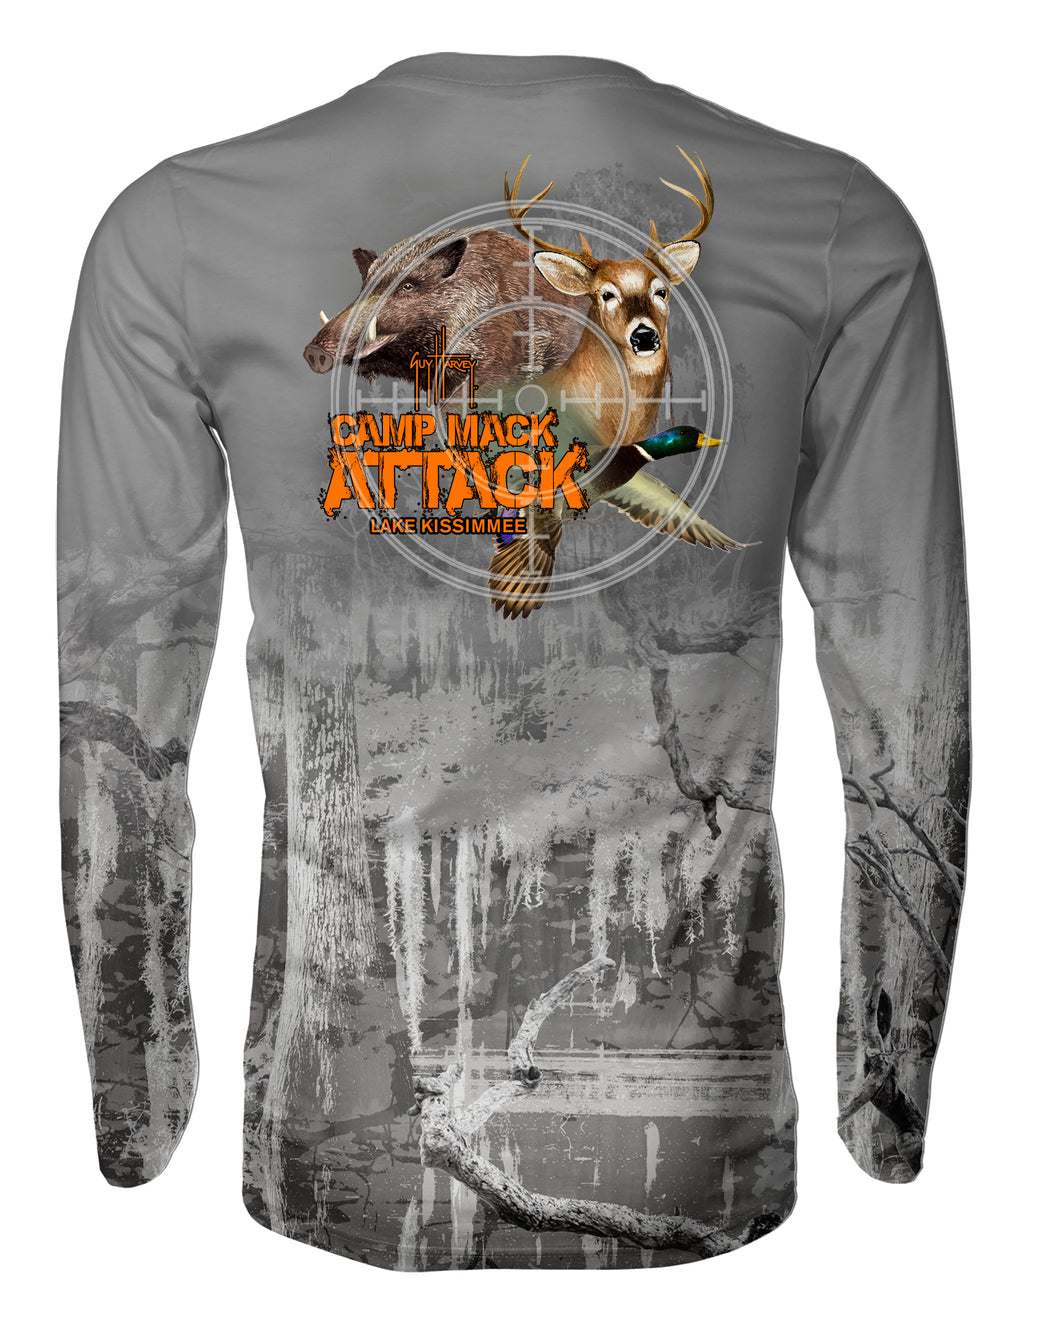 Camp Mack Attack Long Sleeve Performance